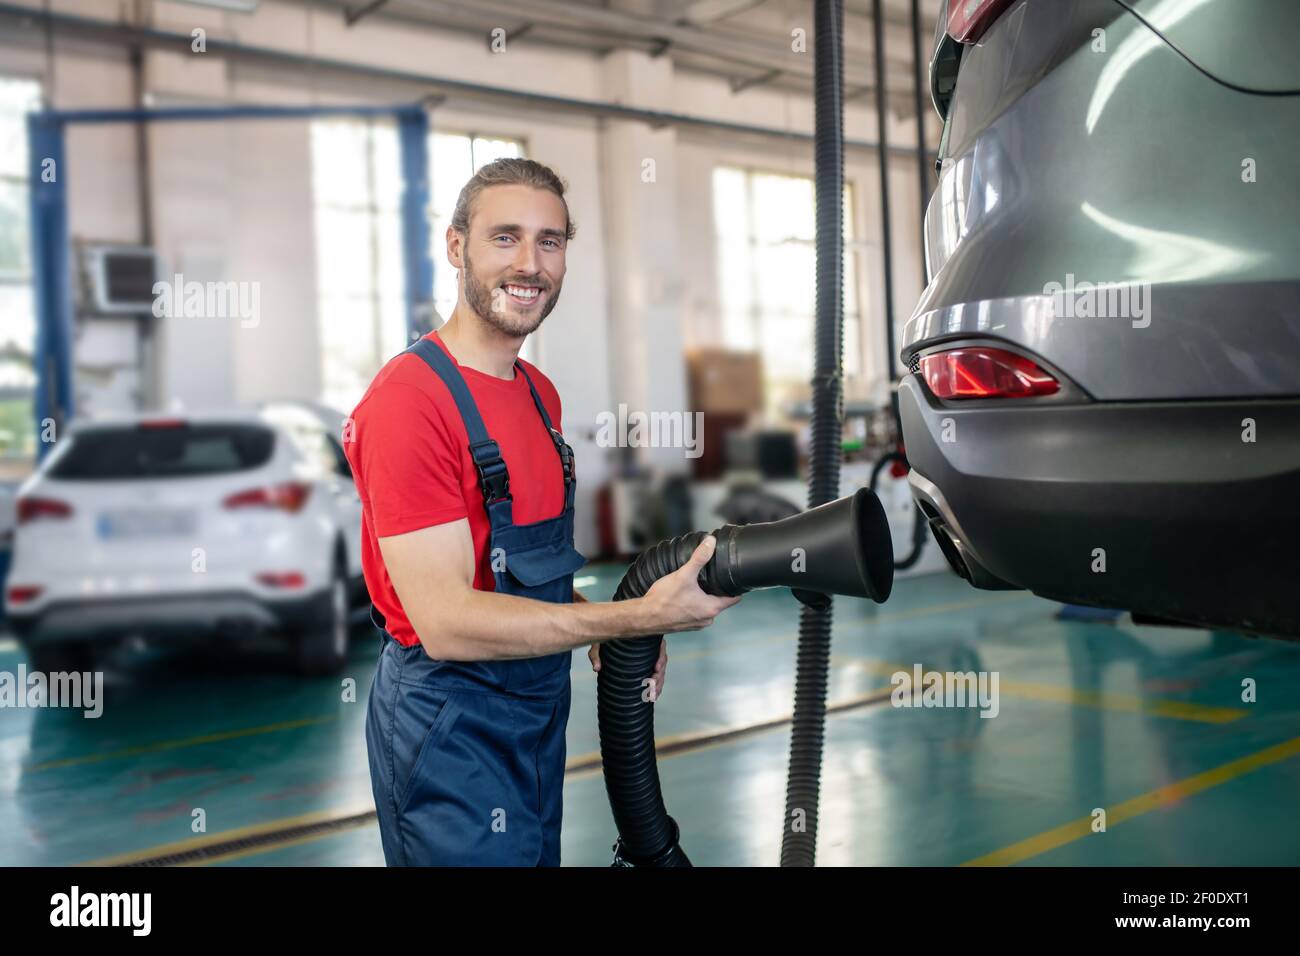 Car repairer with hose near car in garage Stock Photo